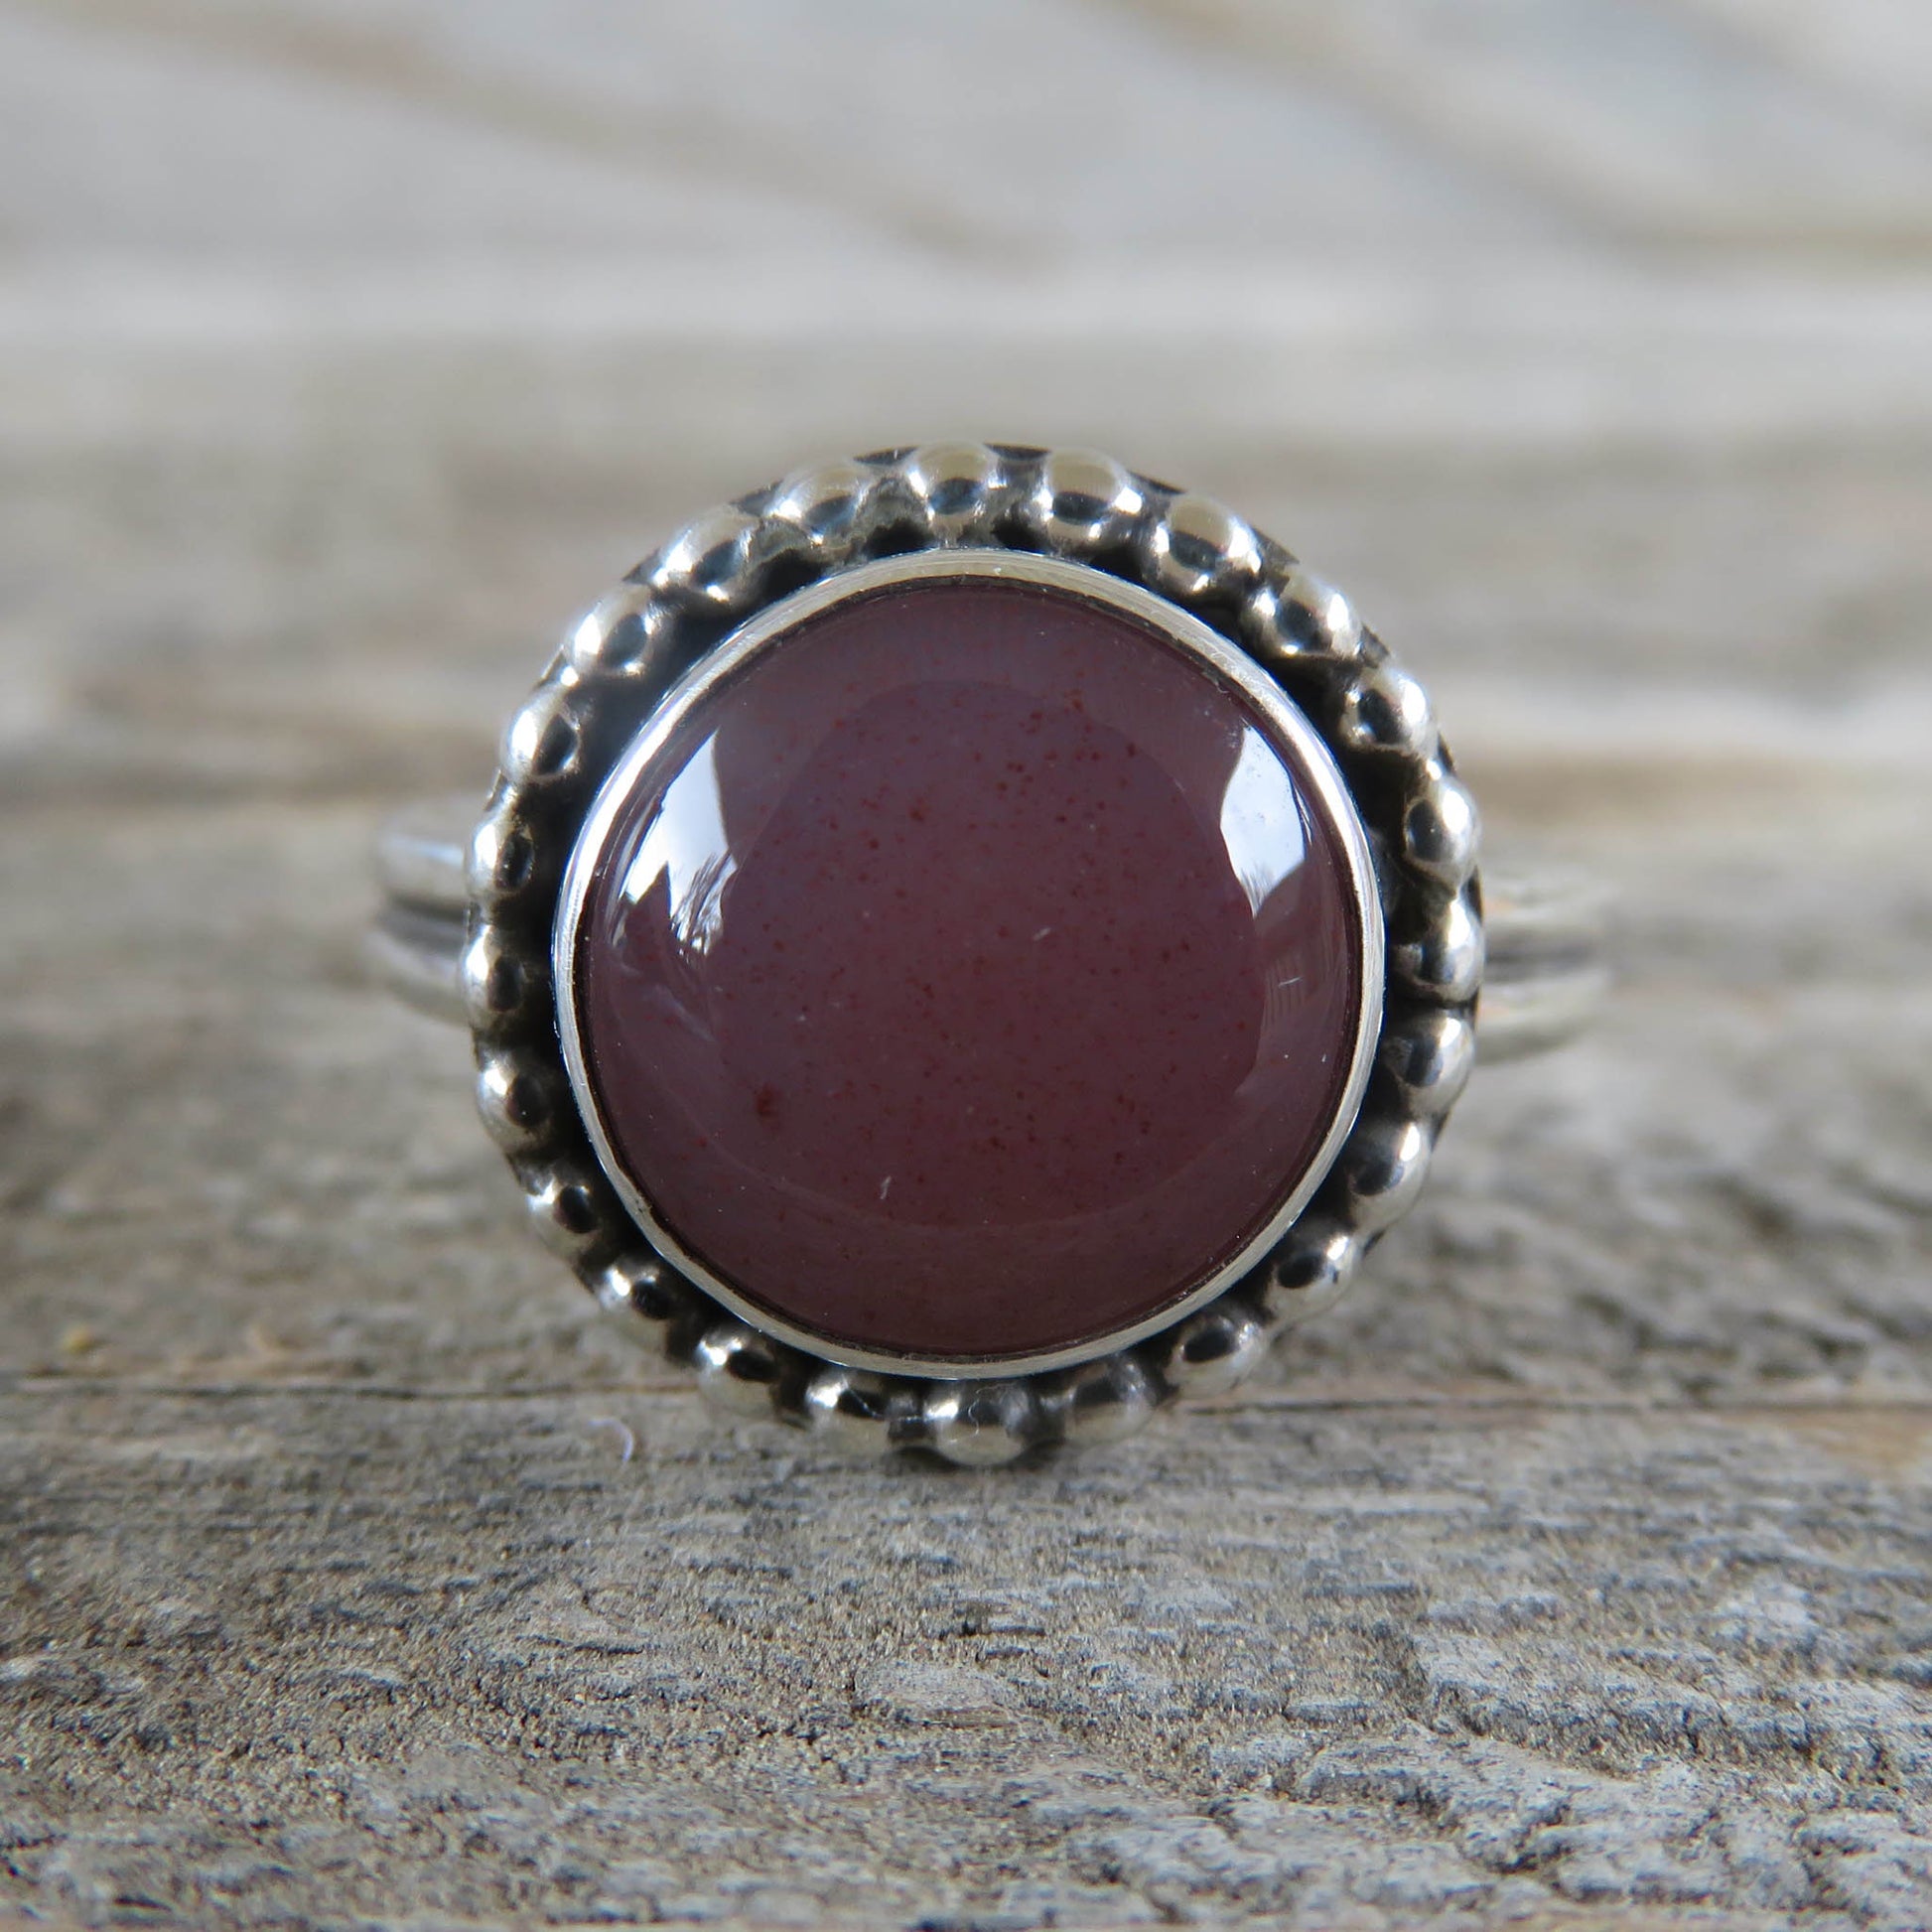 Utah agate and sterling silver ring